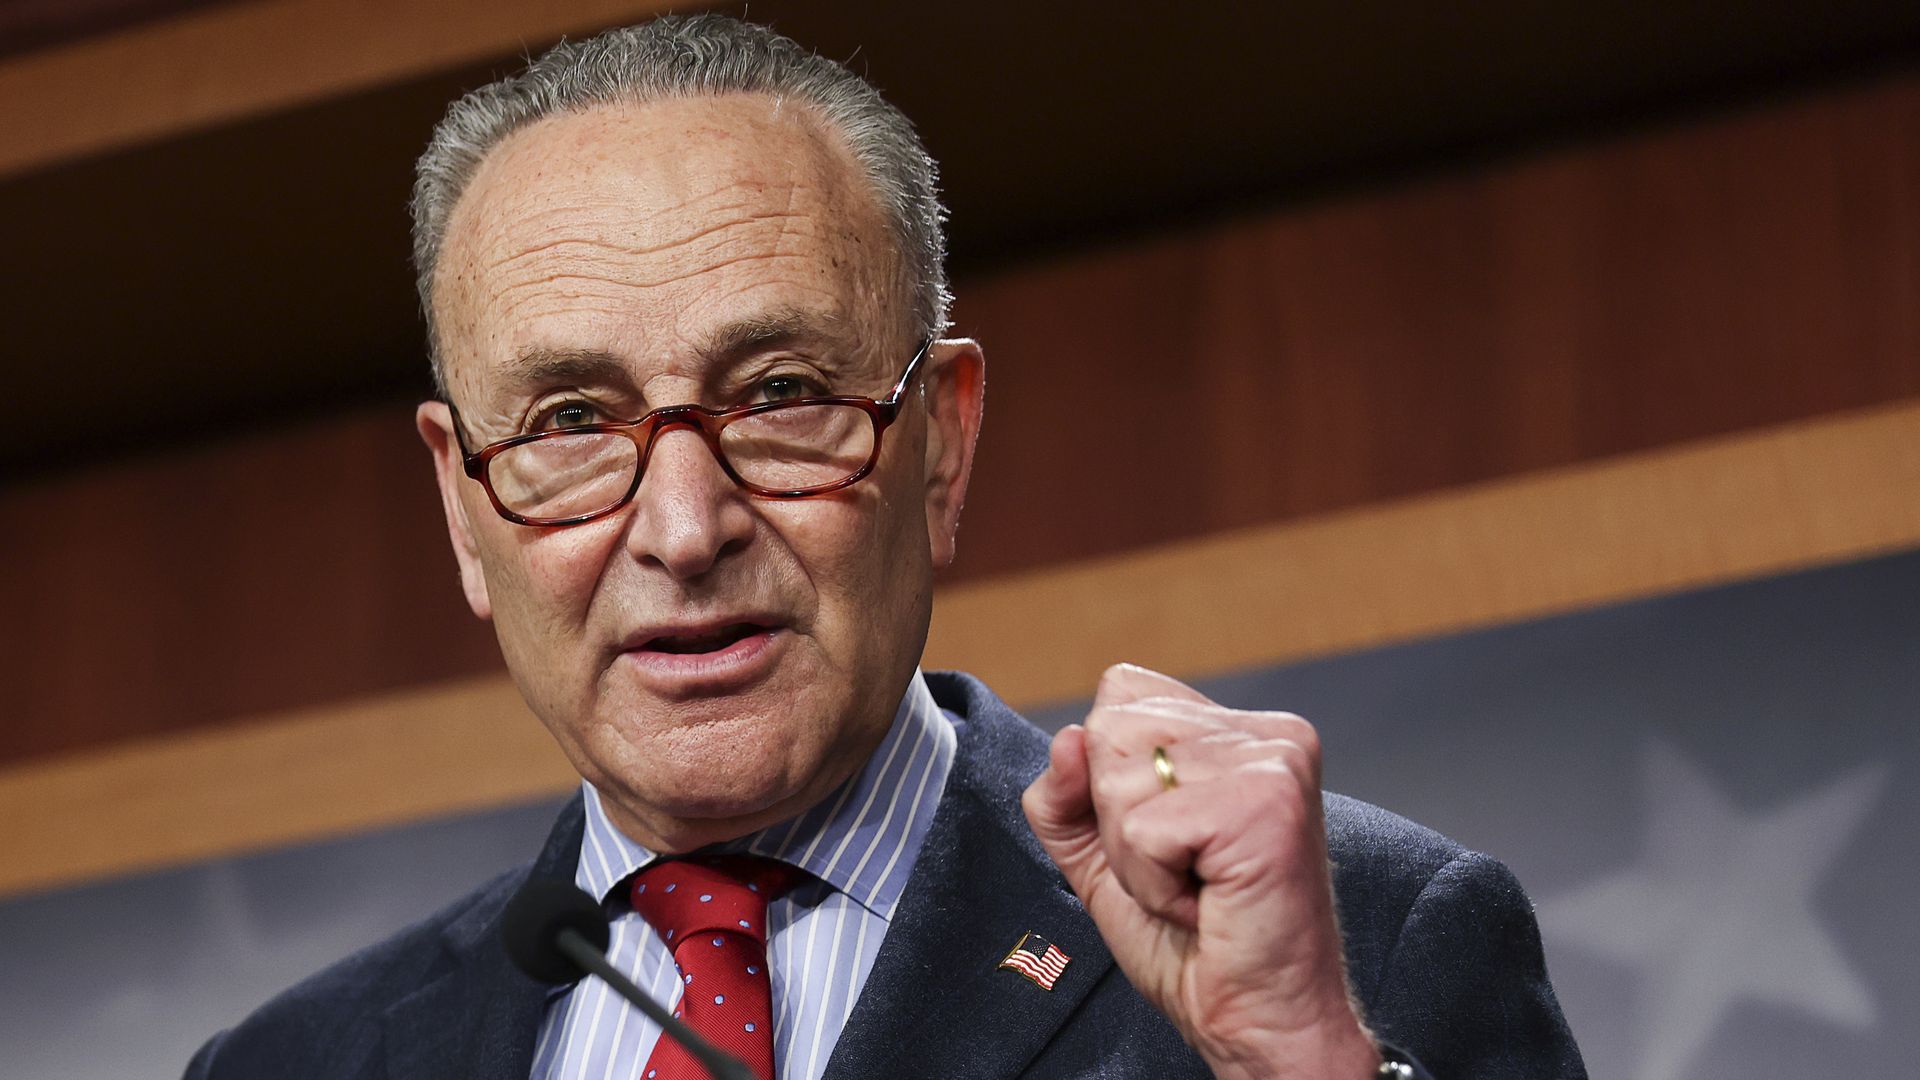 Senate Majority Leader Chuck Schumer speaking during a press conference in March 2021.